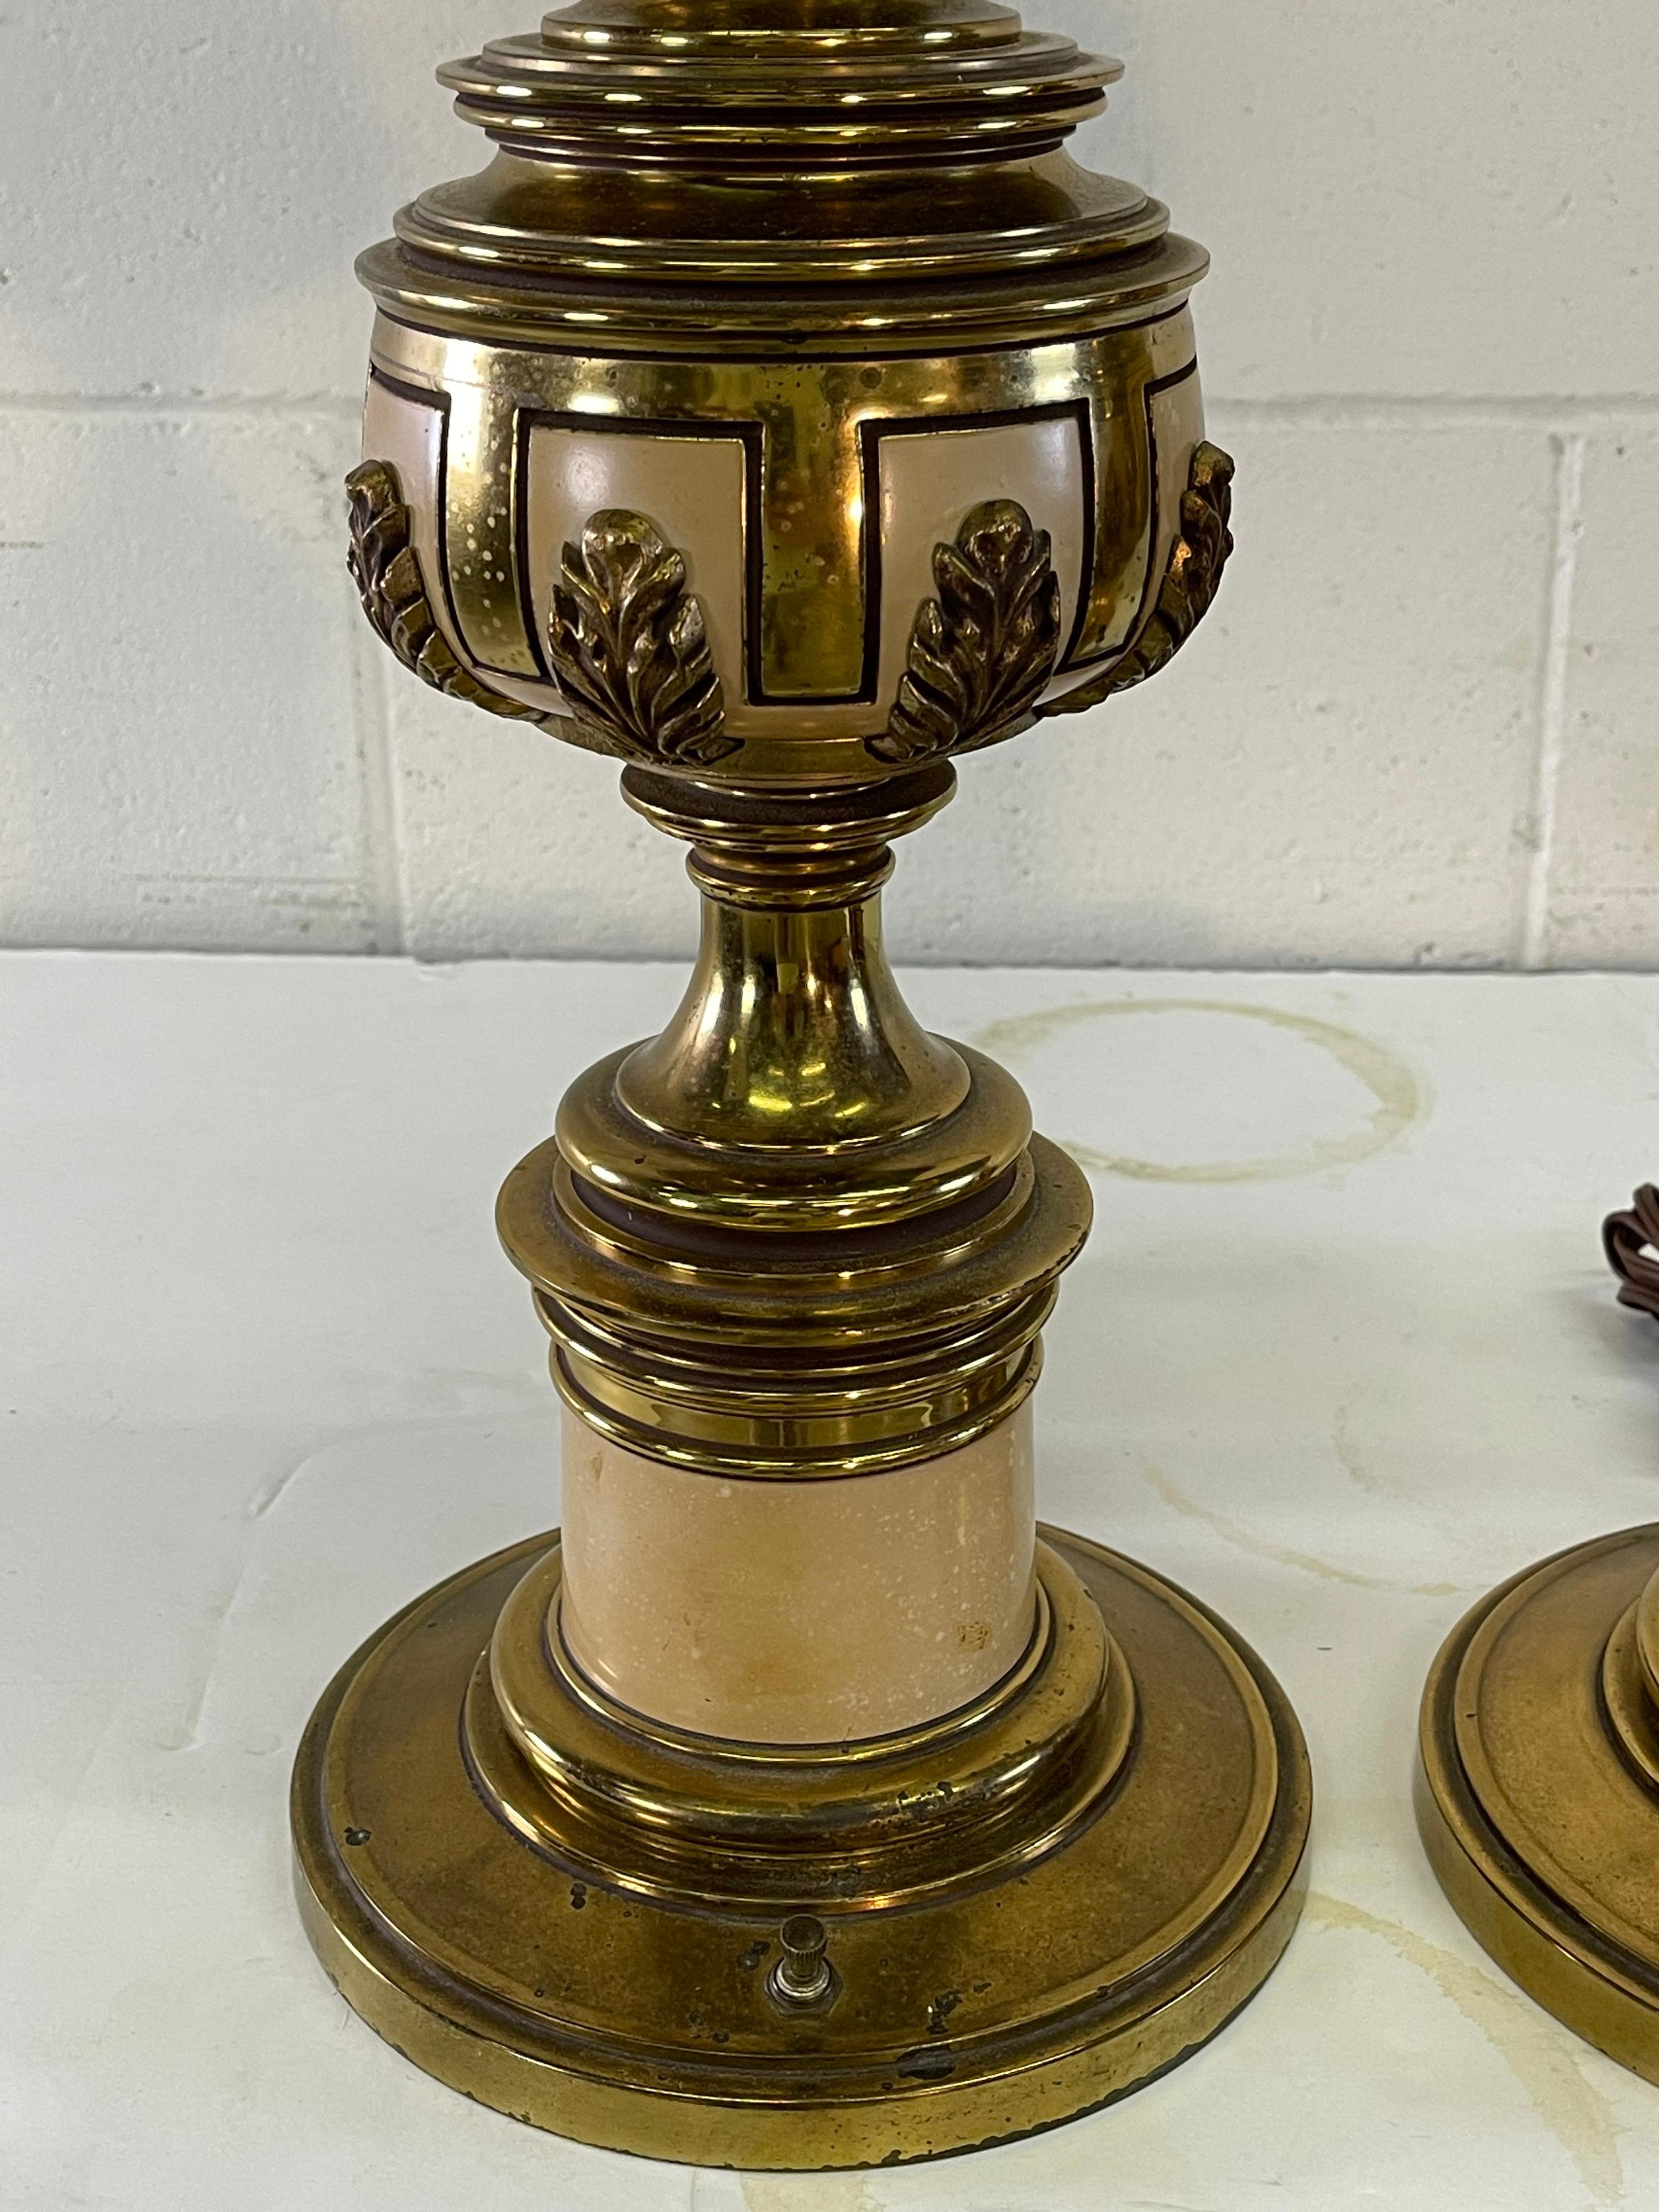 Vintage Stiffel pair of brass table lamps with a leaf accent. The pair are wired for the US and in working condition. Uses standard three-way bulb. Socket, 27.75”H. Harp, 4.5” diameter x 11” height. Light tarnish from age. Marked.